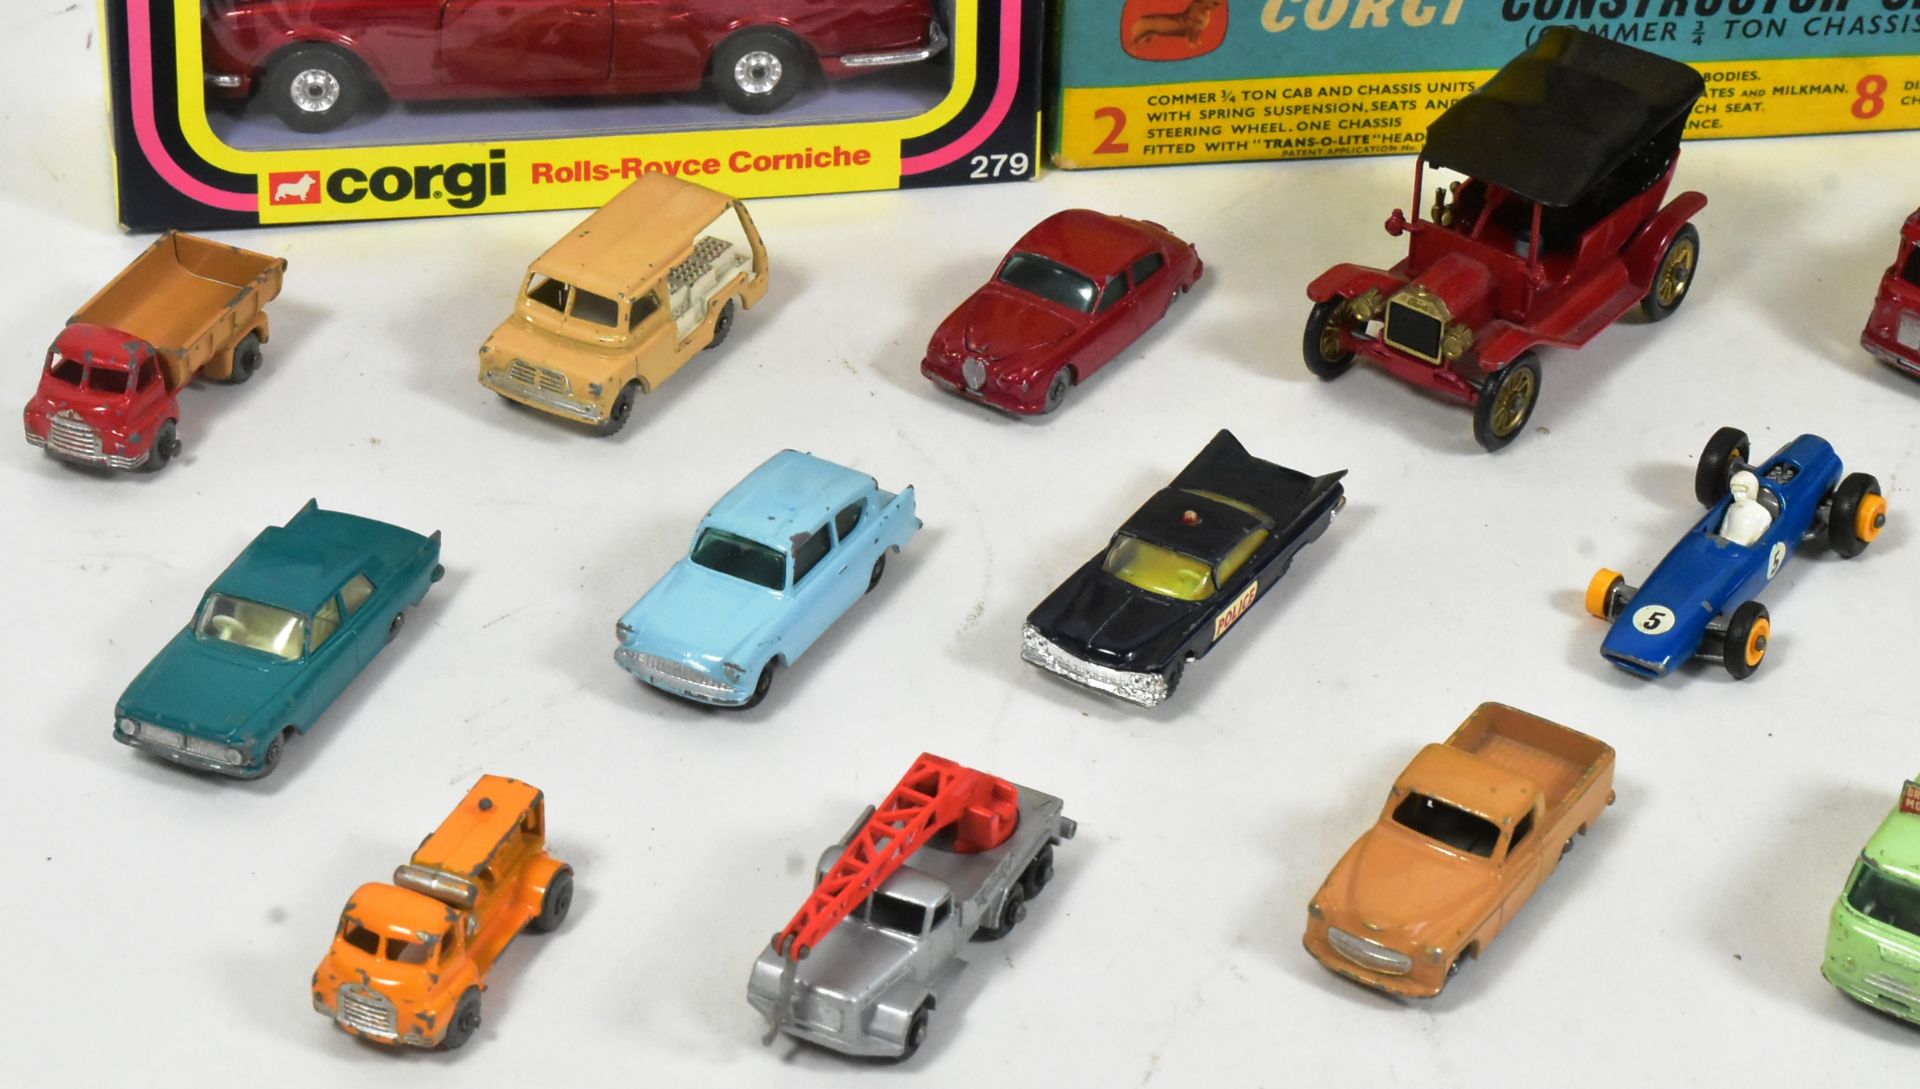 DIECAST - COLLECTION OF VINTAGE DIECAST MODELS - Image 5 of 6